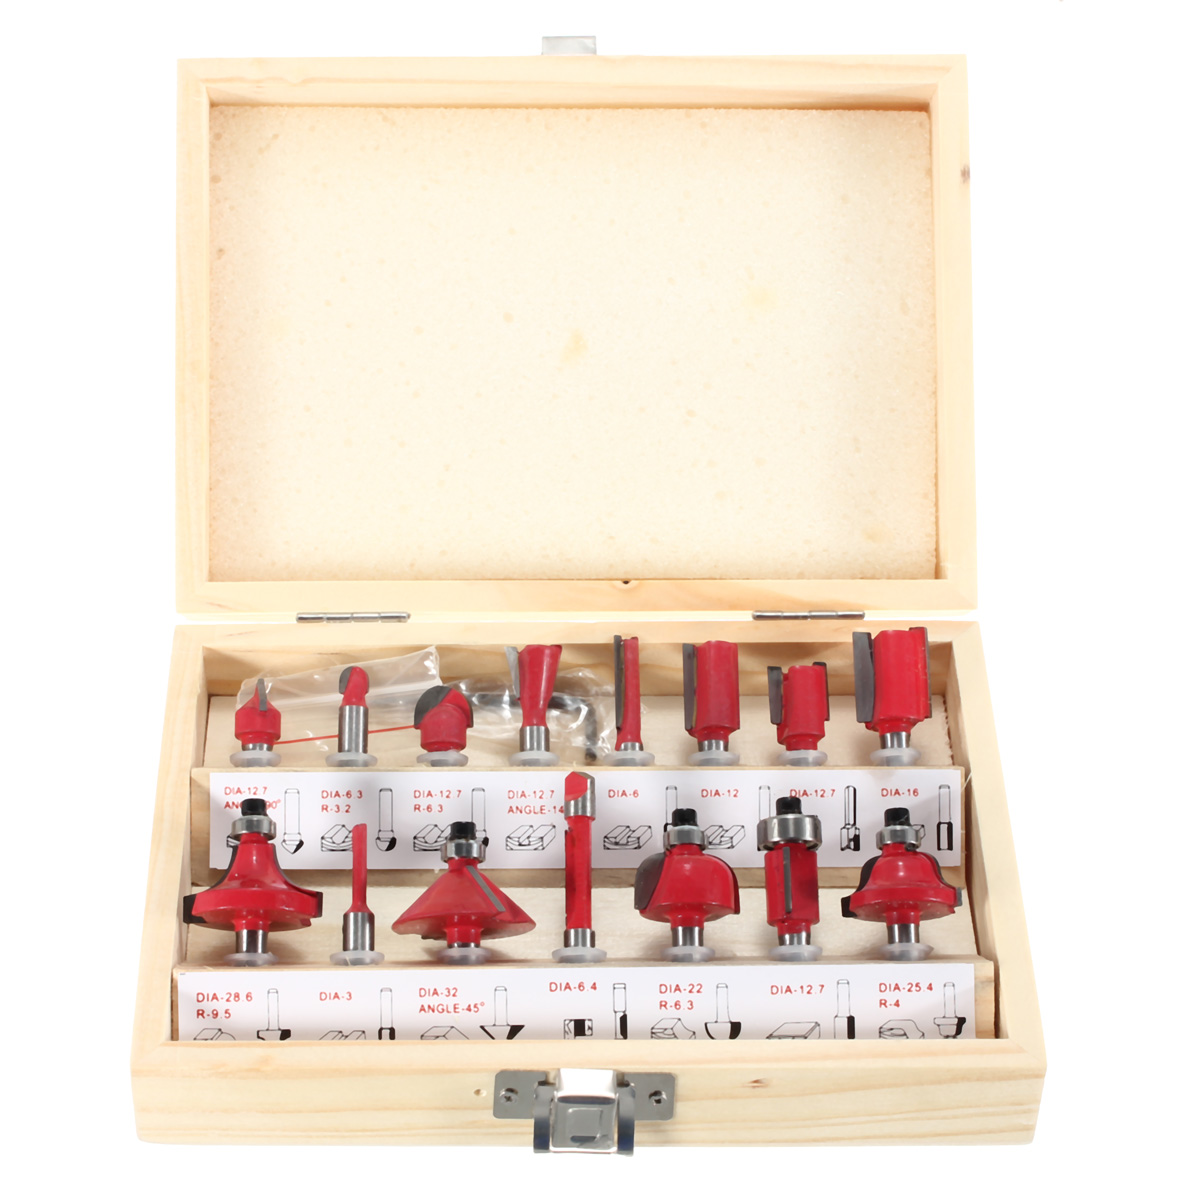 

15pcs 1/4 Inch Shank Router Bit Set Woodworking Milling Cutter with Wood Case